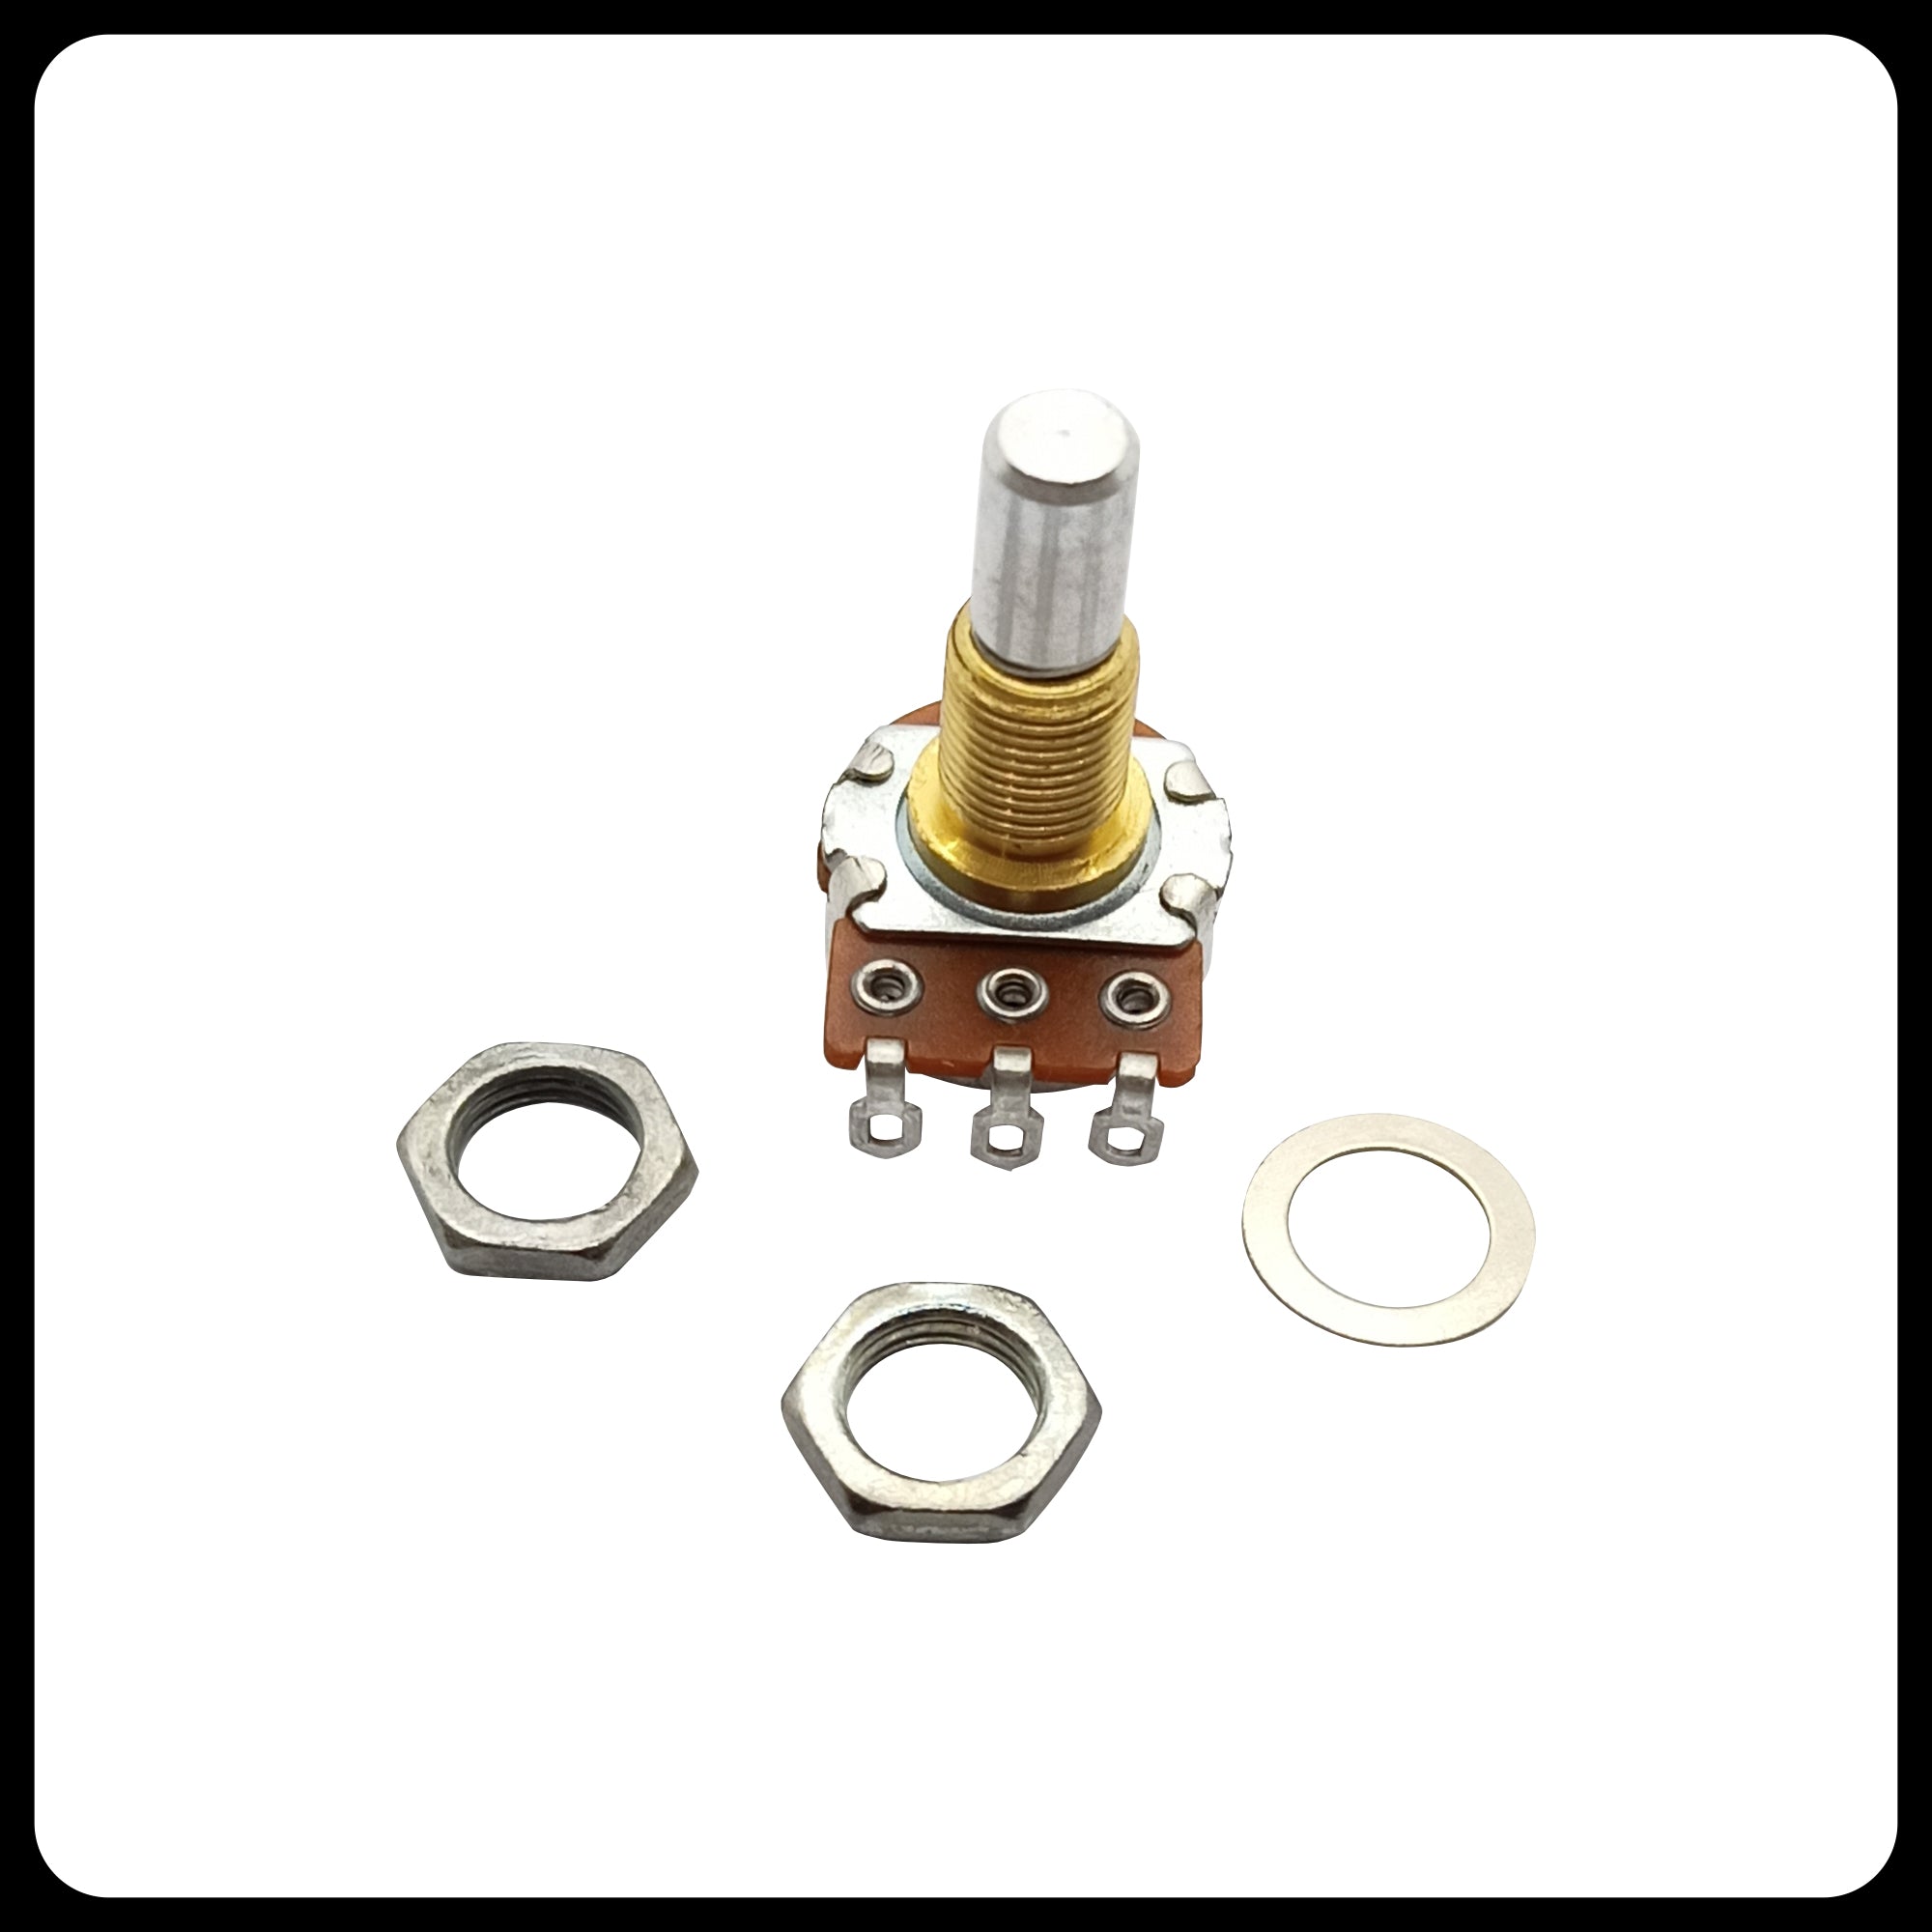 Alpha® Metric ⅜” Standard Length Potentiometer with Center Click (Solid Shaft)